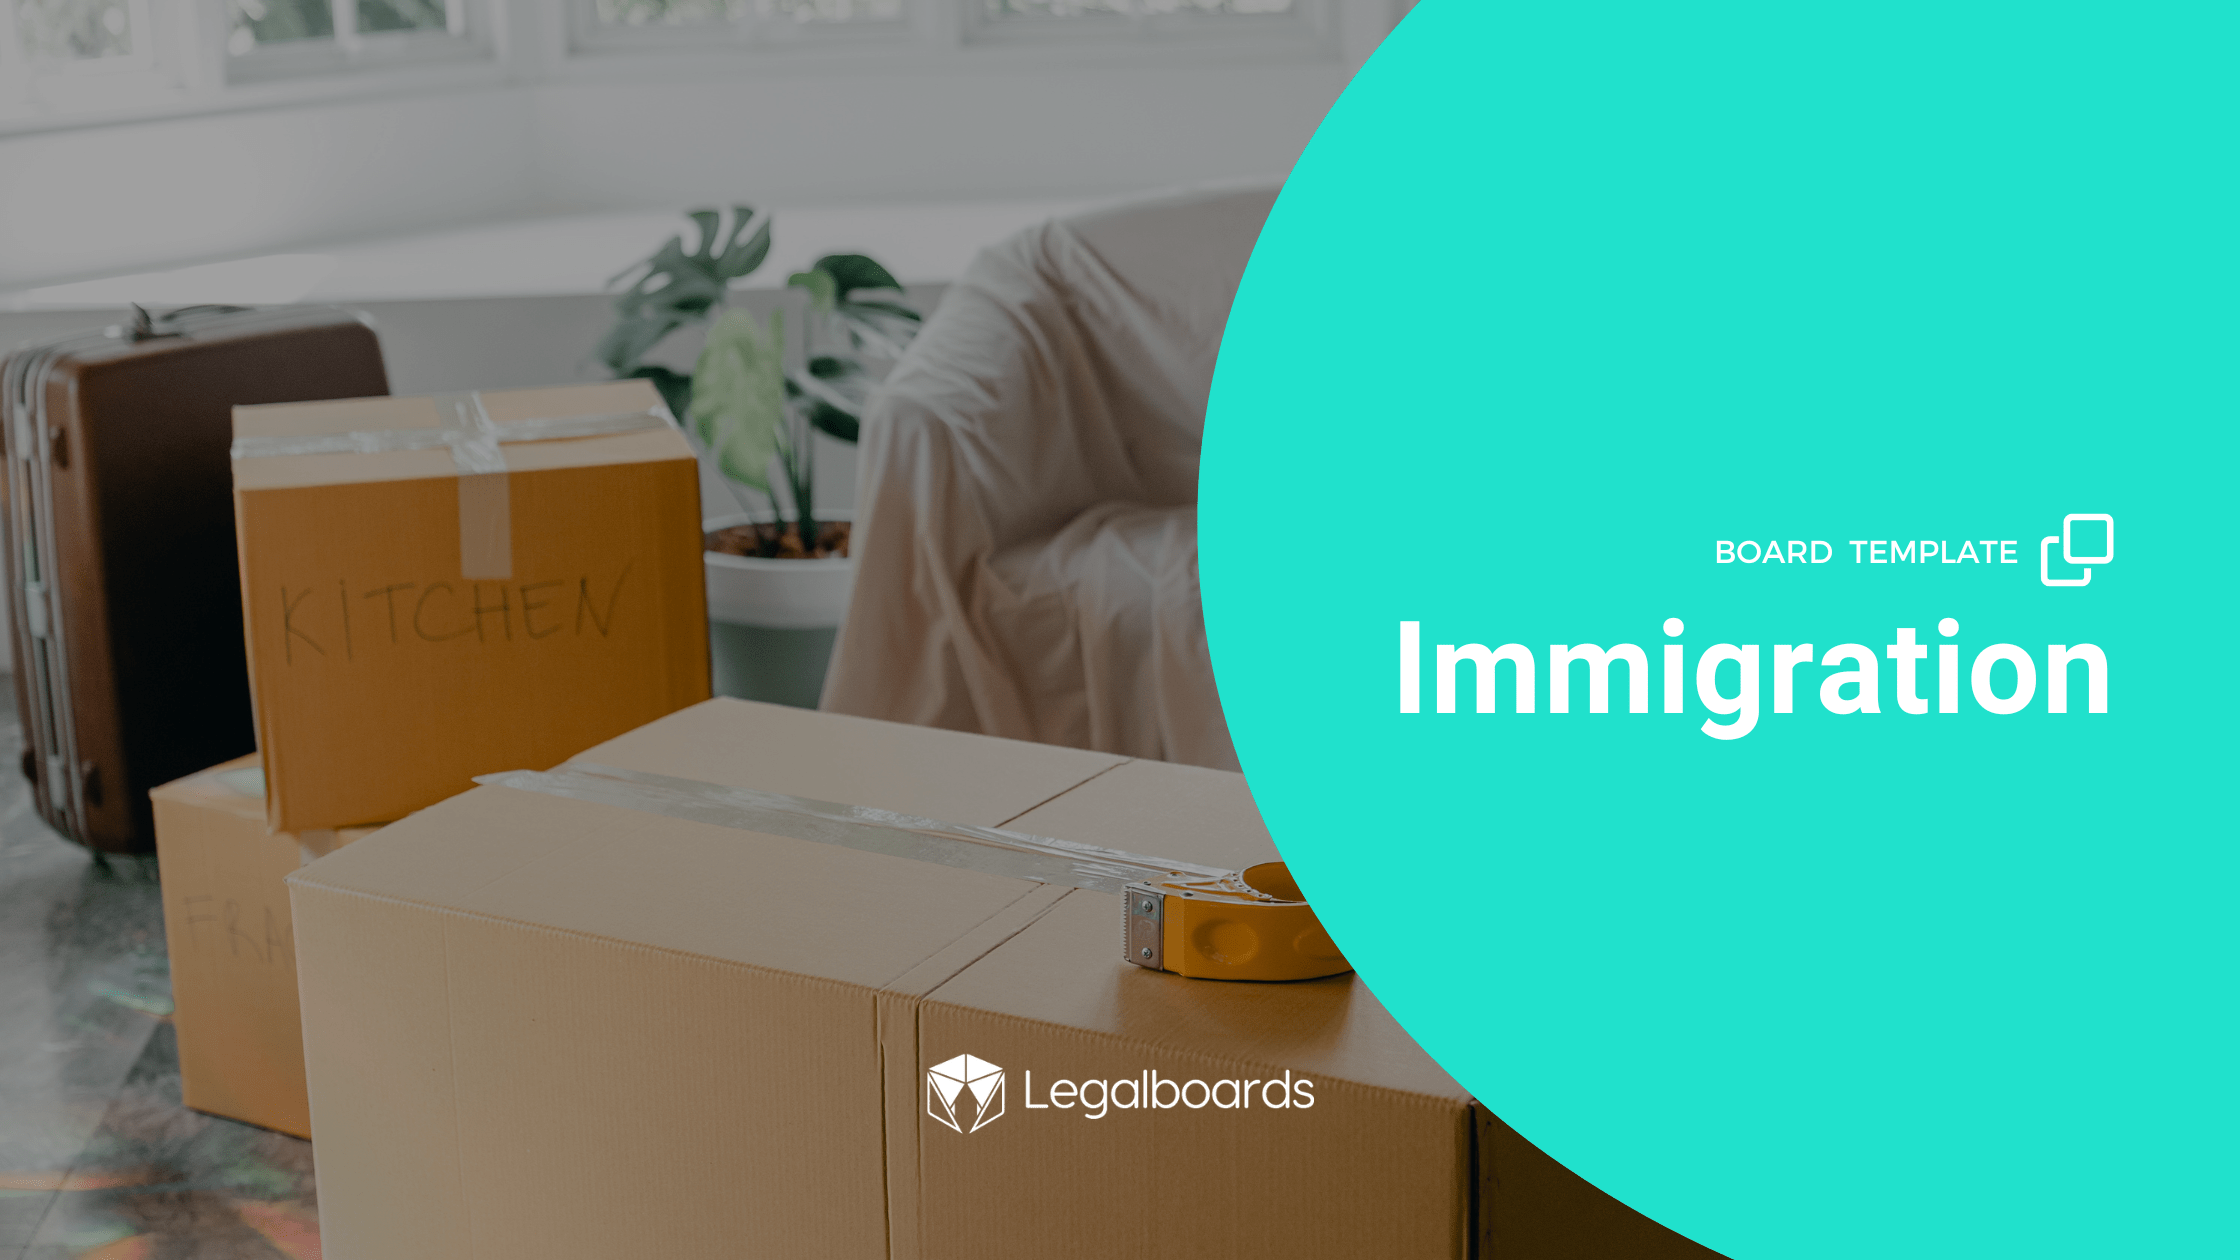 Working in Legalboards: Immigration Board Template Featured Image